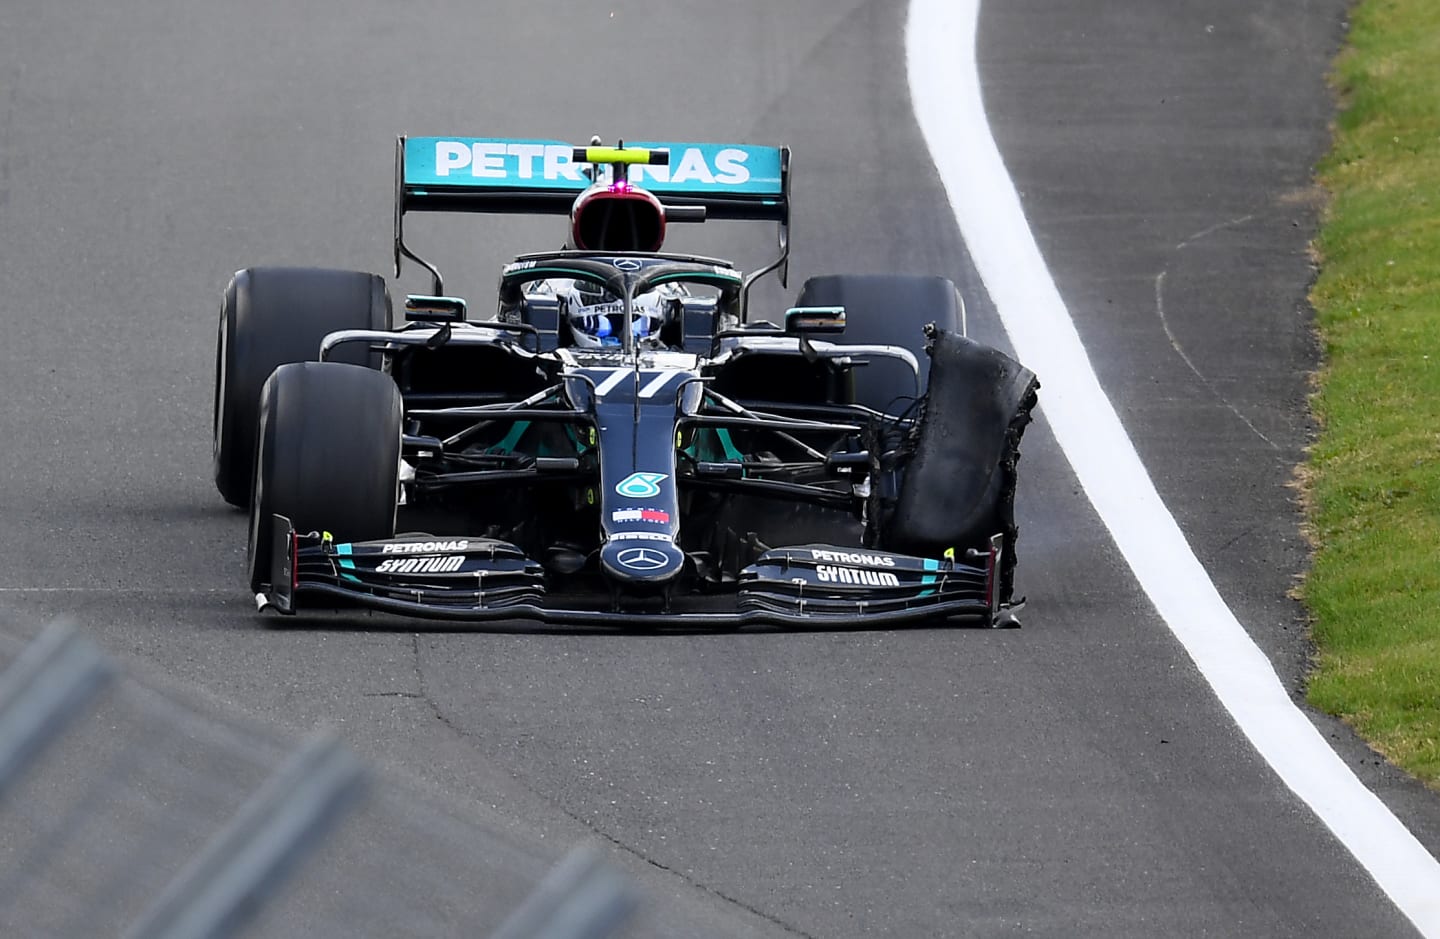 NORTHAMPTON, ENGLAND - AUGUST 02: Valtteri Bottas of Finland driving the (77) Mercedes AMG Petronas F1 Team Mercedes W11 with a punctured front left tyre during the F1 Grand Prix of Great Britain at Silverstone on August 02, 2020 in Northampton, England. (Photo by Clive Mason - Formula 1/Formula 1 via Getty Images)